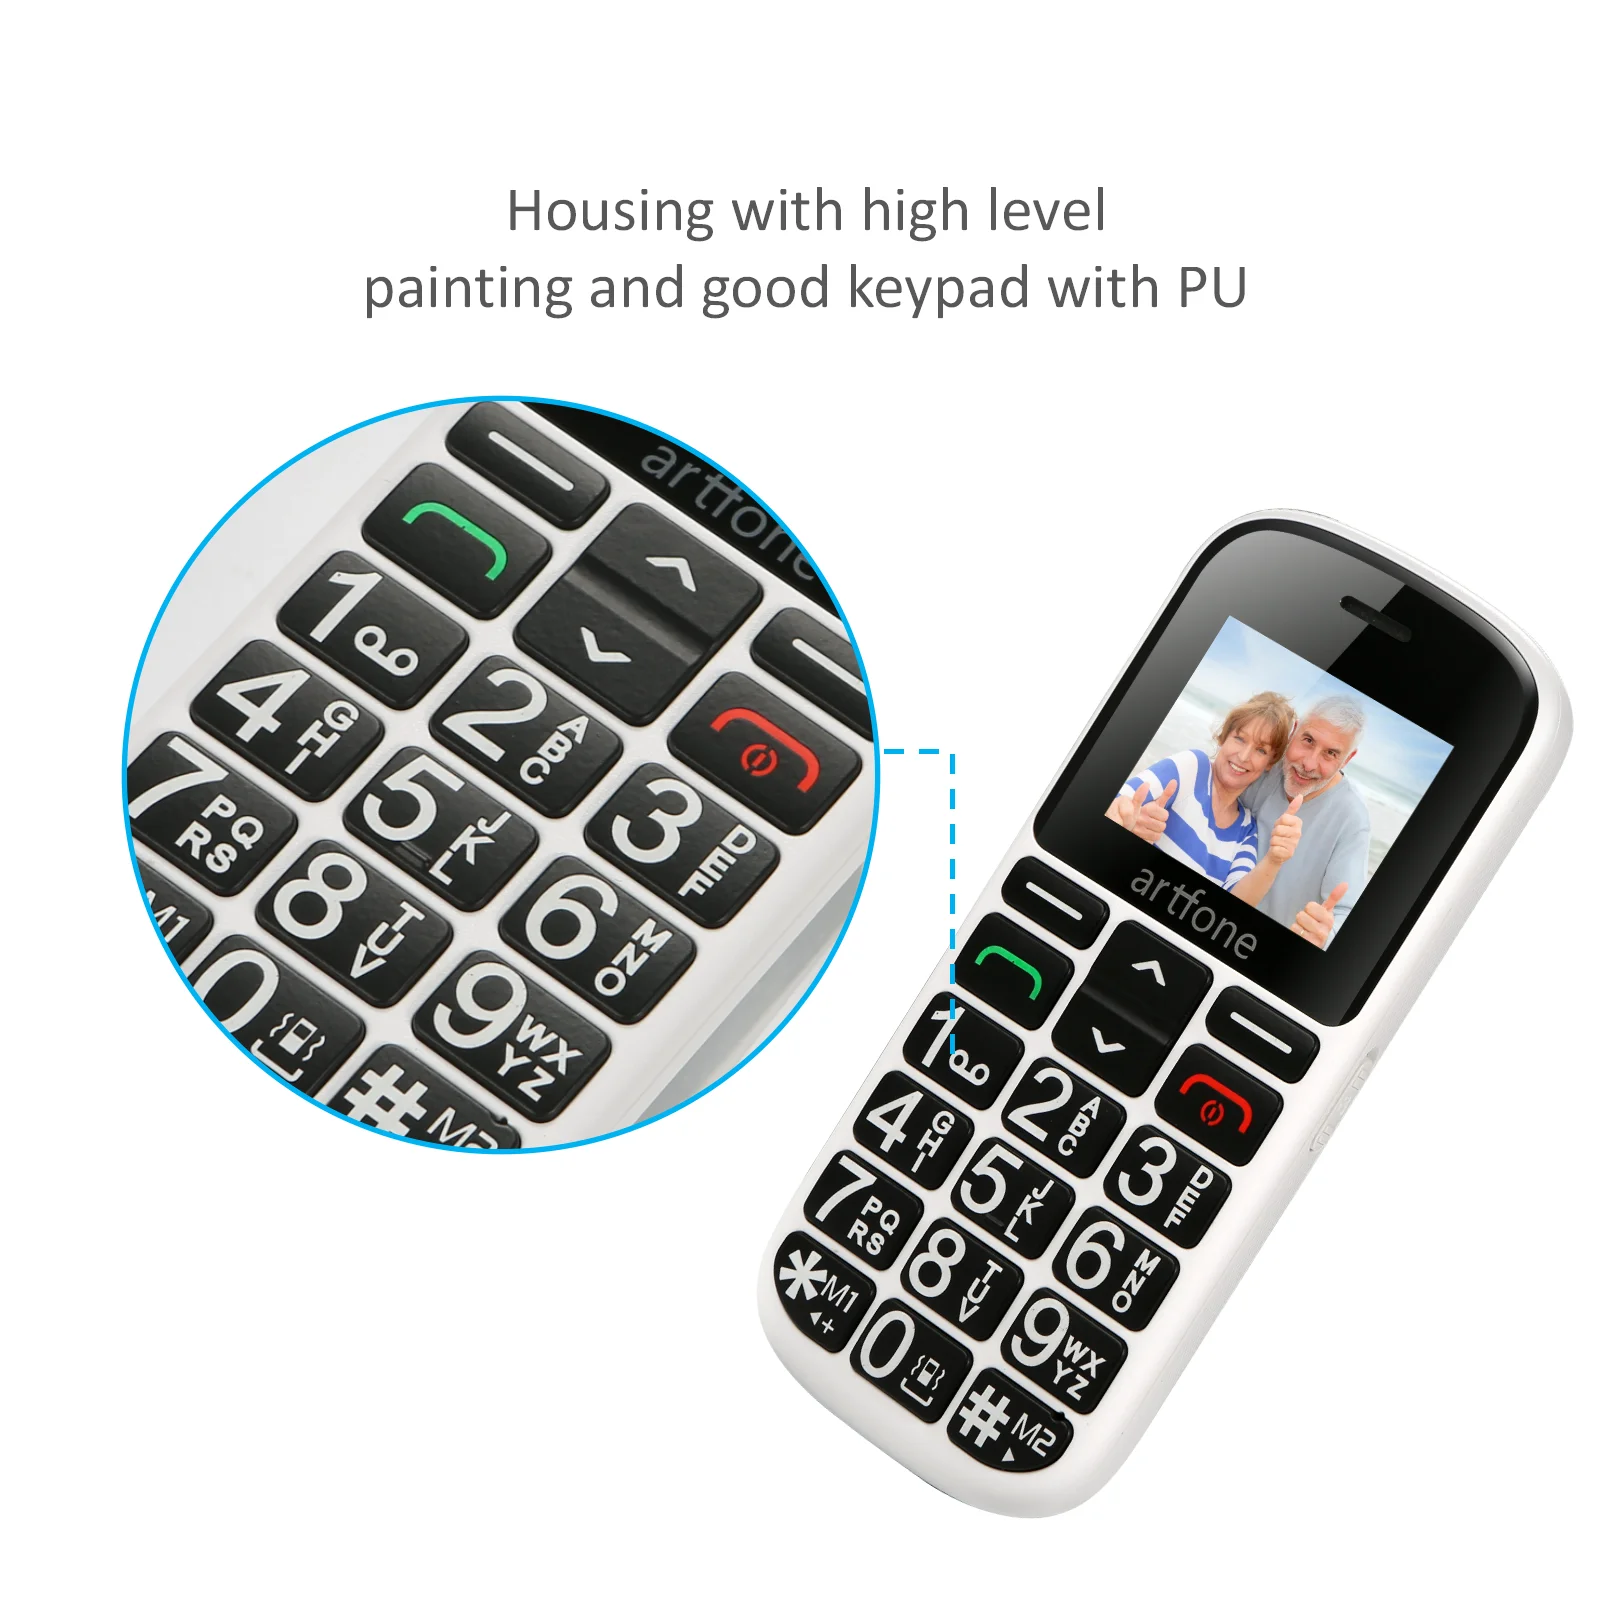 

artfone CS188 Big Button Mobile Phone for Elderly,Upgraded GSM Mobile Phone With SOS Button | Talking Number | 1400mAh Battery |